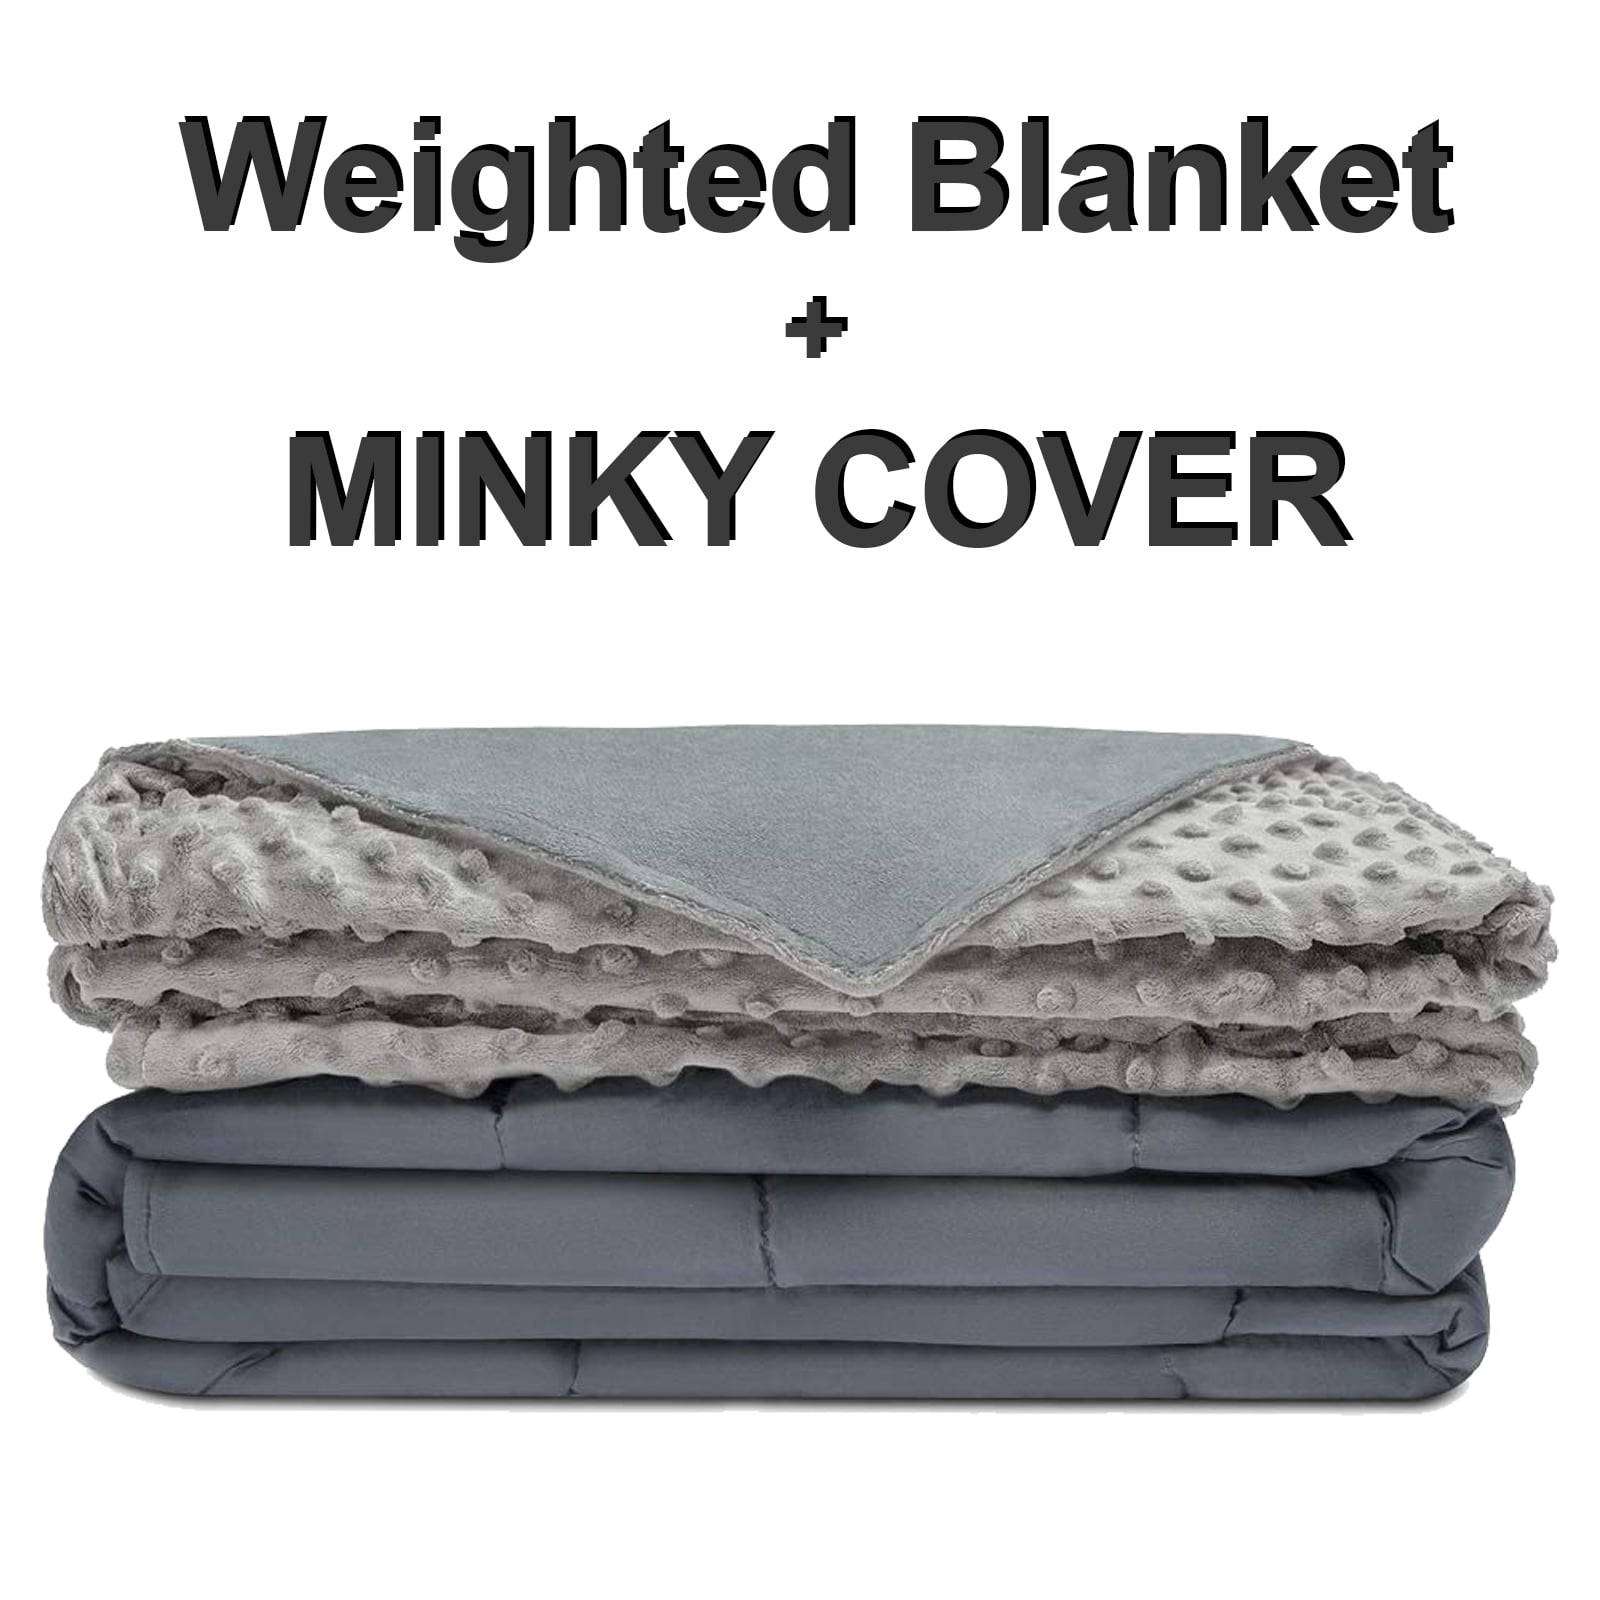 Quility Cooling Weighted Blanket| 15 LBS - Walmart.com - Walmart.com